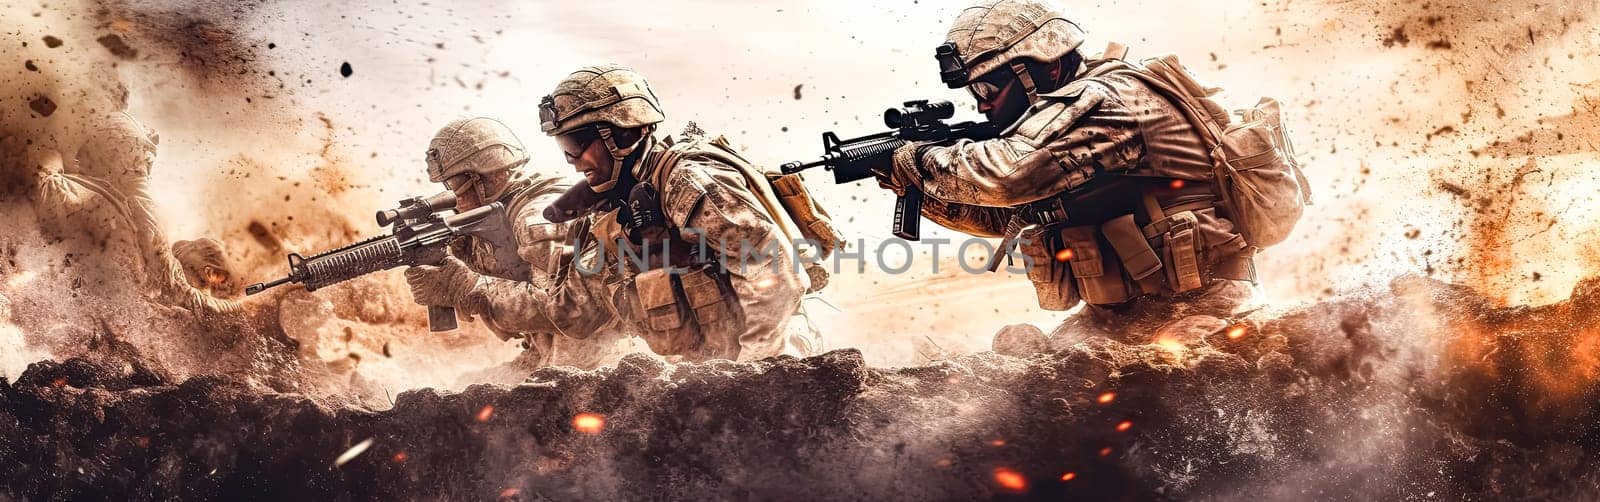 Soldiers in dynamic action on the battlefield, surrounded by explosions, embodying strength and courage